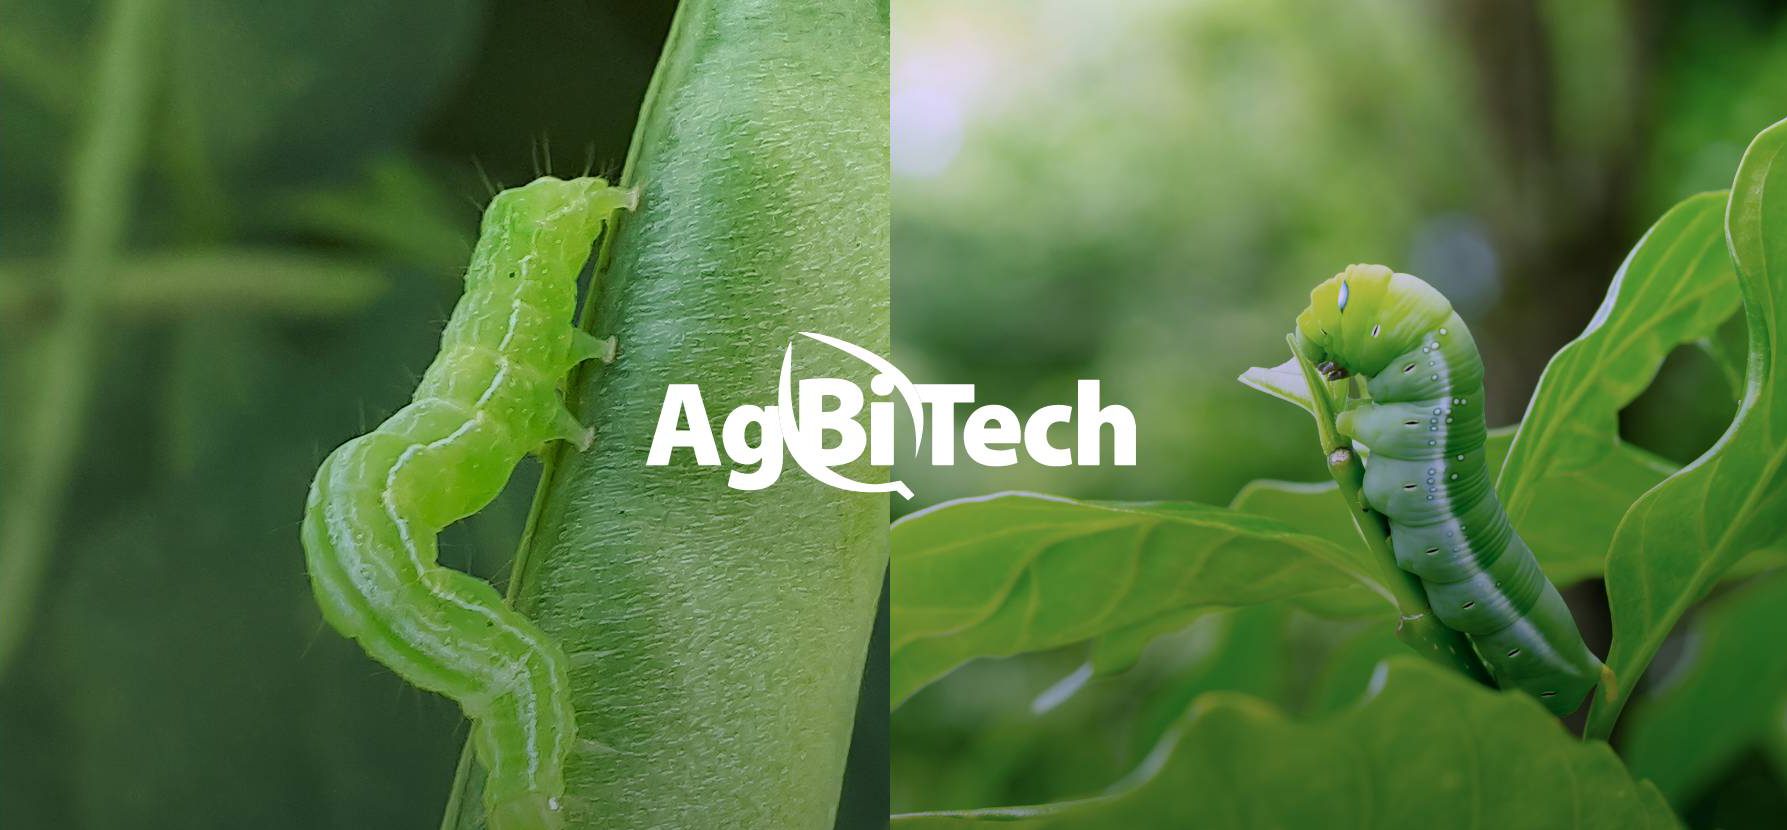 AgBiTech Appoints Peter Berweger, Agriculture Industry Executive, as Group Chief Executive Officer@2x